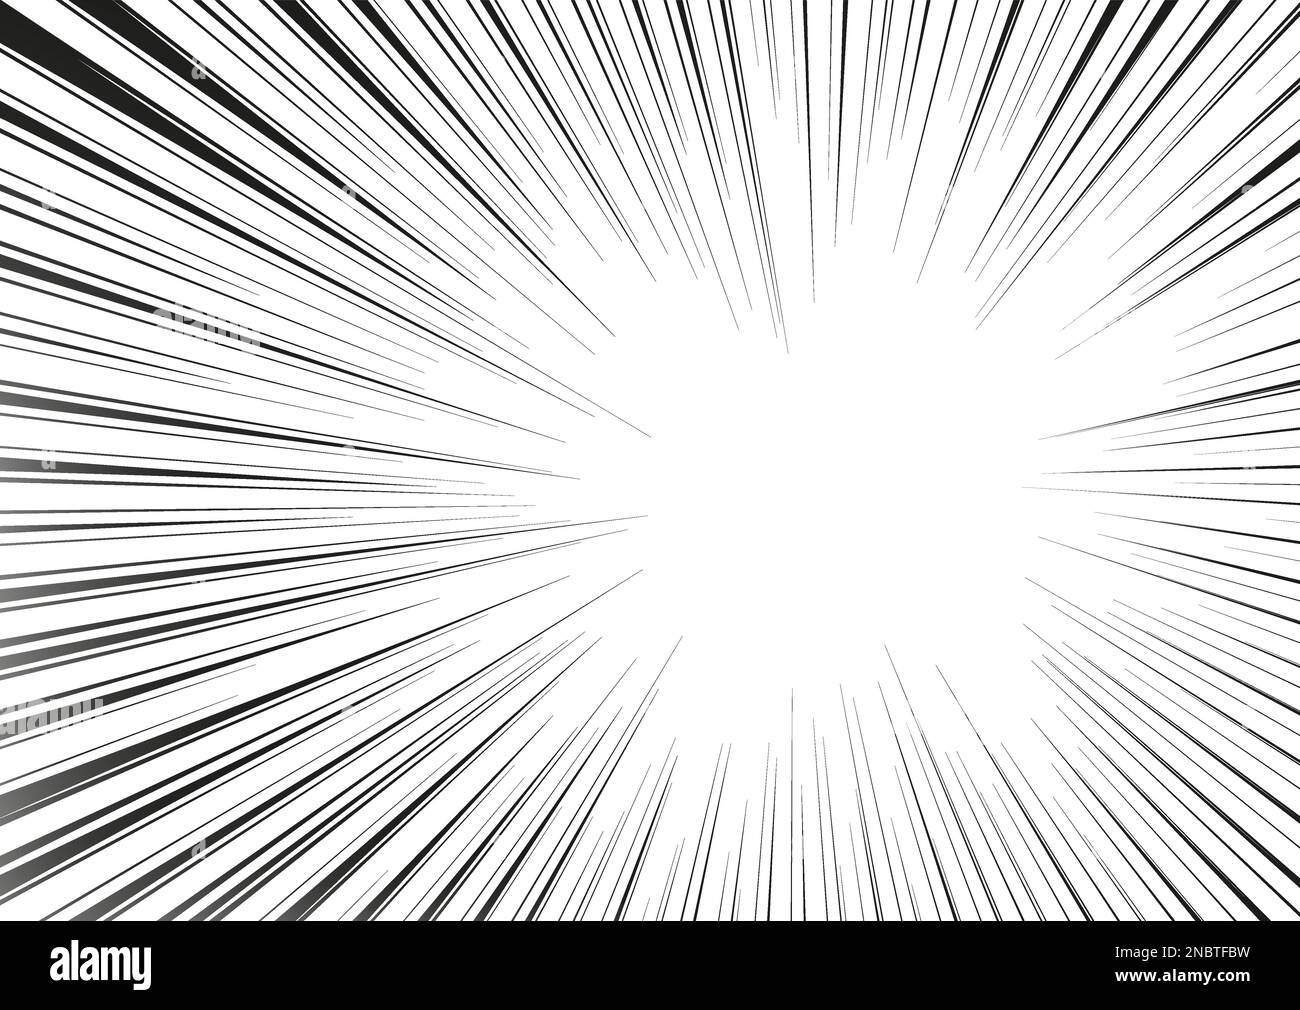 Radial Line Drawing. Action, Speed Lines, Stripes Stock Vector -  Illustration of graphic, fight: 187946130